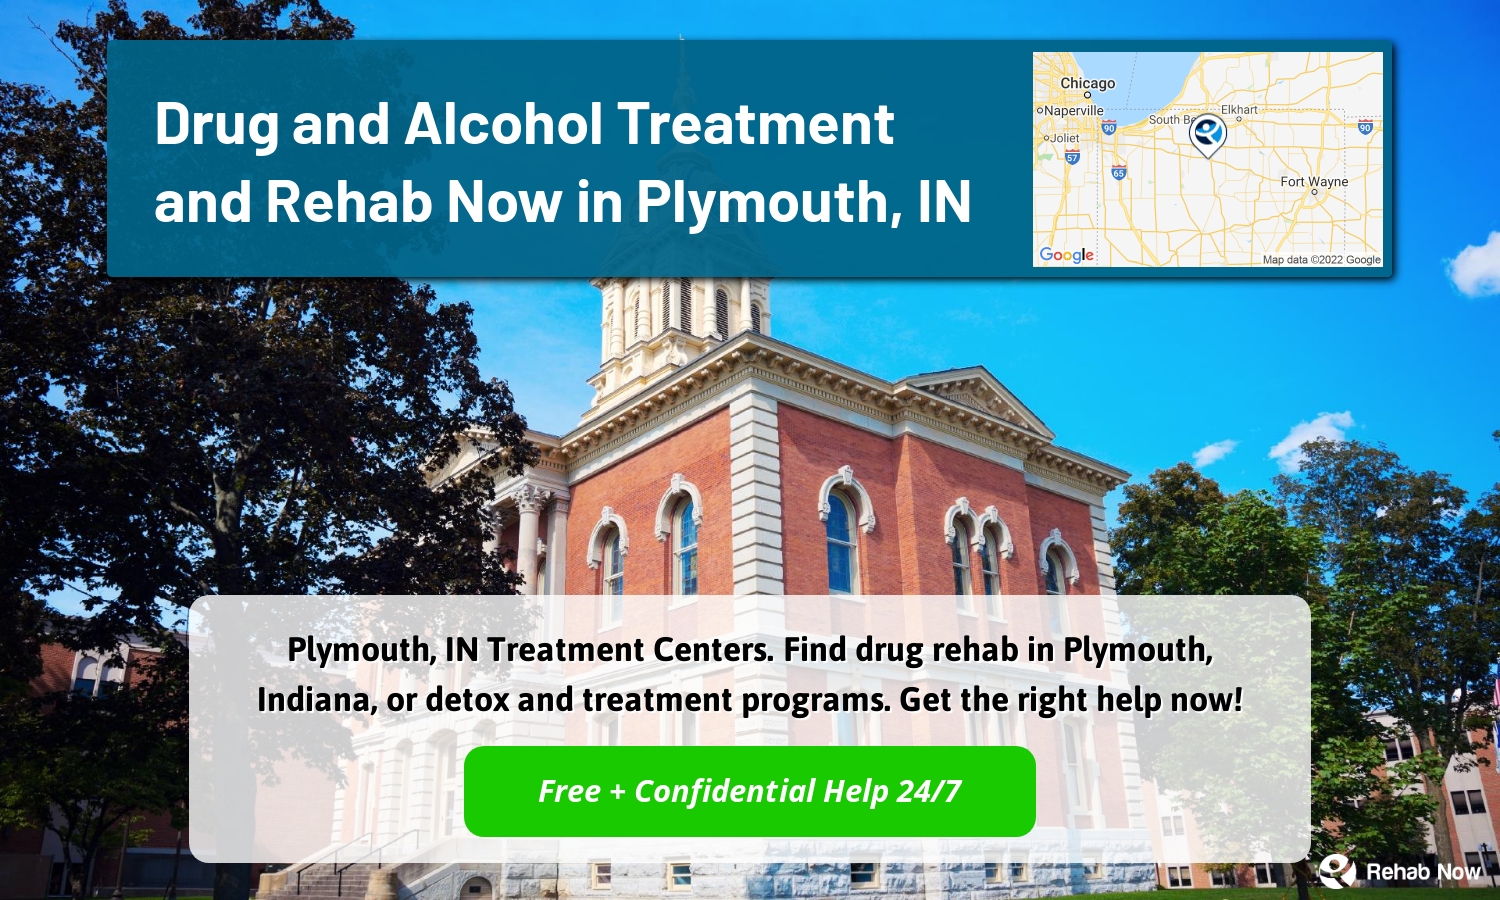 Plymouth, IN Treatment Centers. Find drug rehab in Plymouth, Indiana, or detox and treatment programs. Get the right help now!